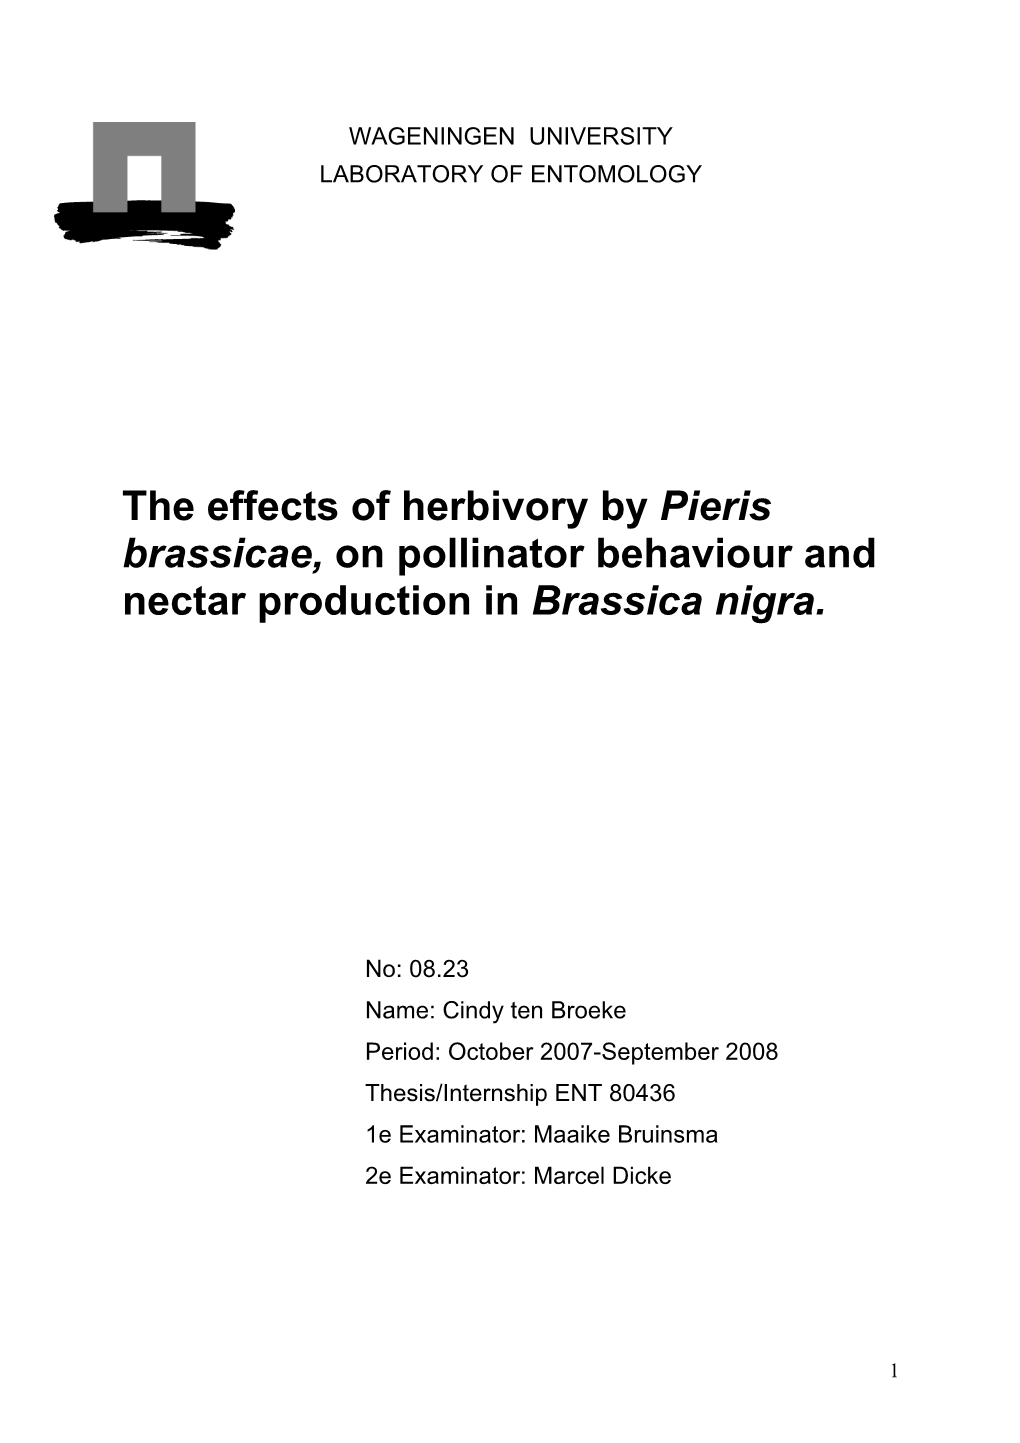 The Effects of Herbivory by Pieris Brassicae, on Pollinator Behaviour and Nectar Production in Brassica Nigra